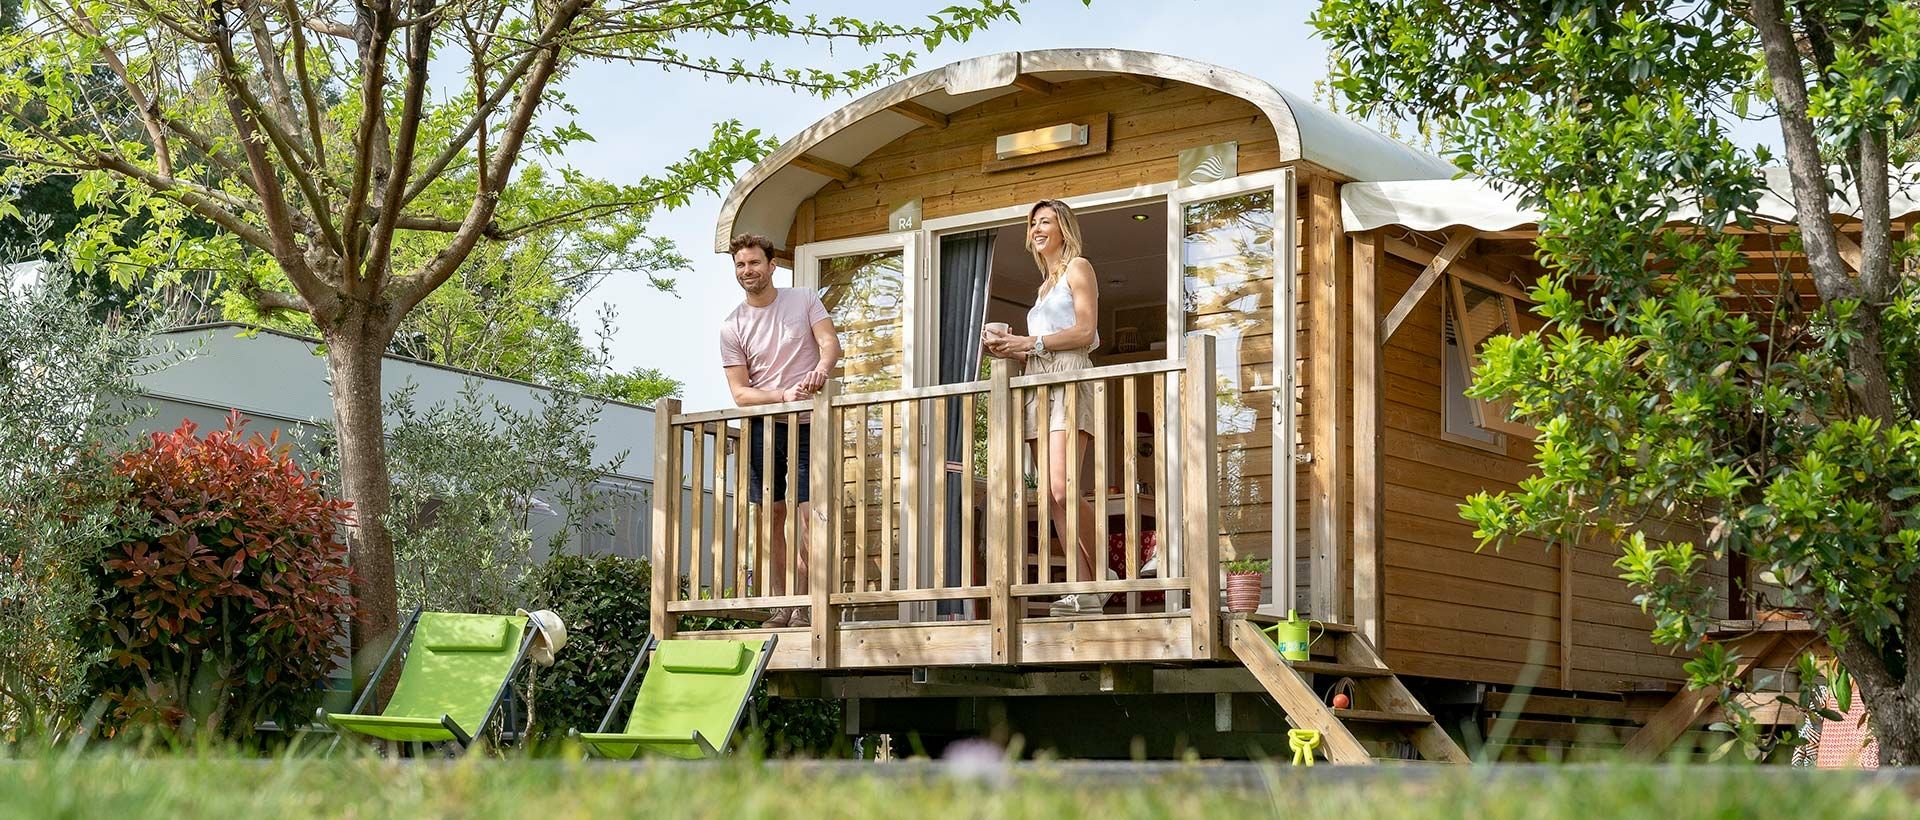 Glamping for couples